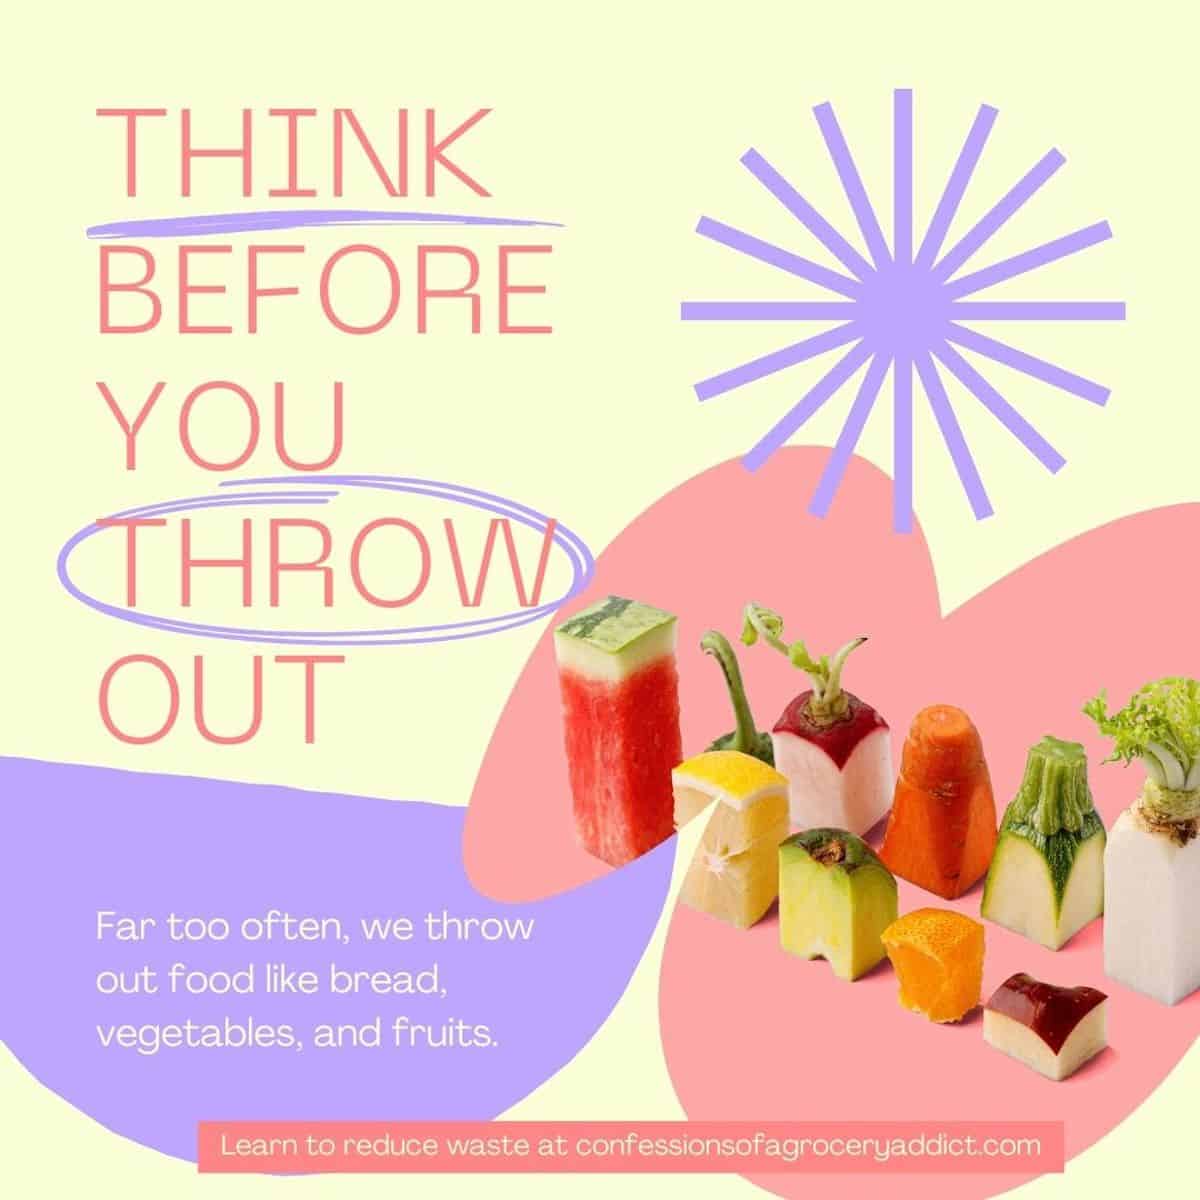 colorful square image that reads "think before you throw out — far too often we throw out food like bread, vegetables, and fruits" with pictures of vegetable scraps.